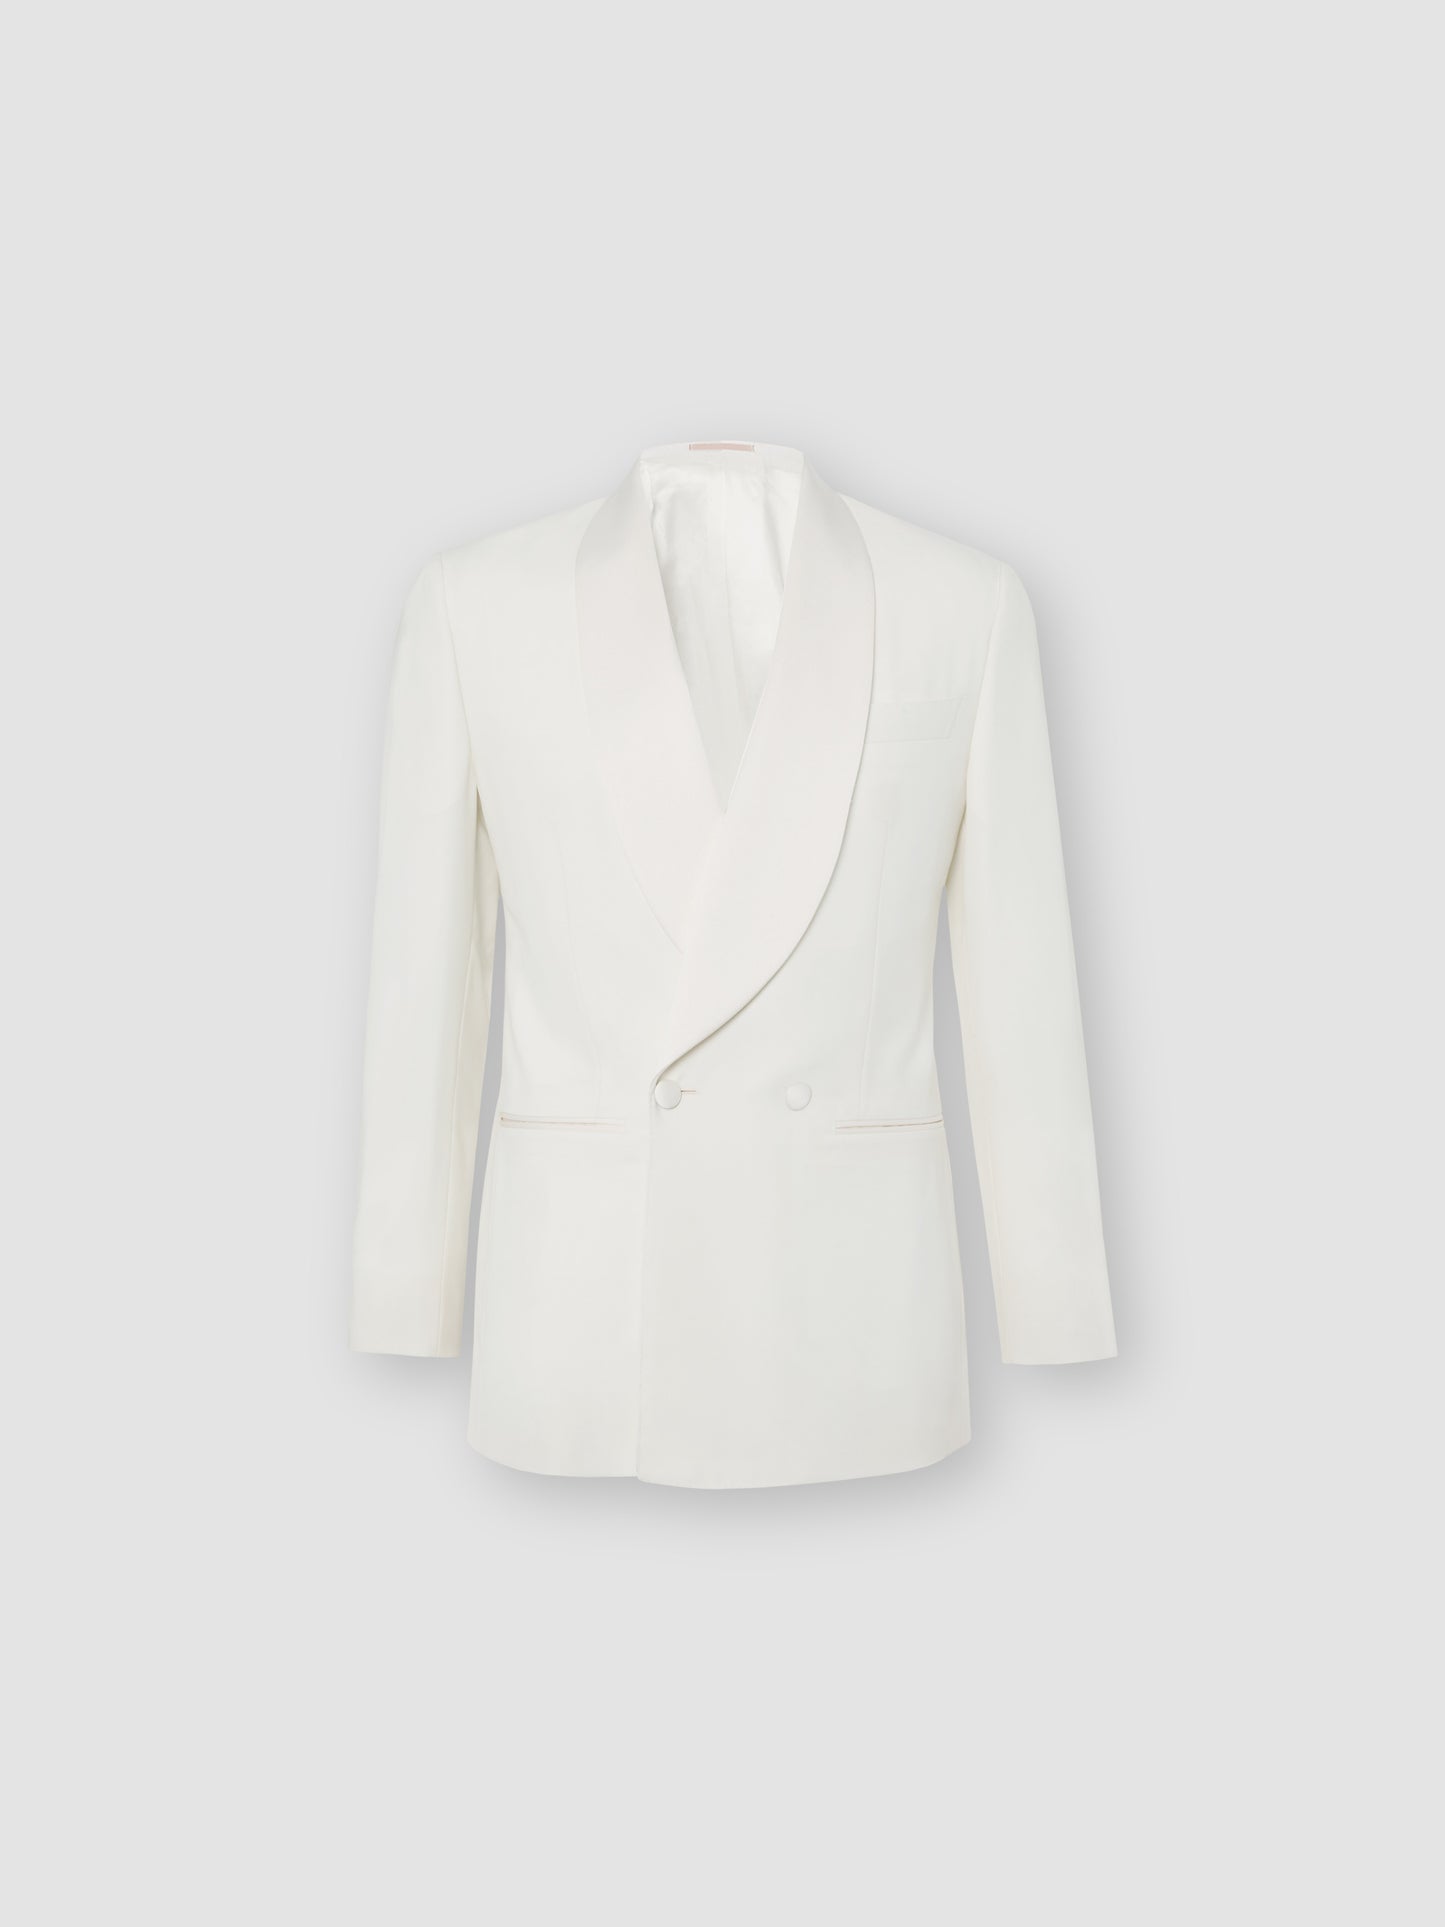 Wool Double Breasted Shawl Lapel Dinner Jacket White Product